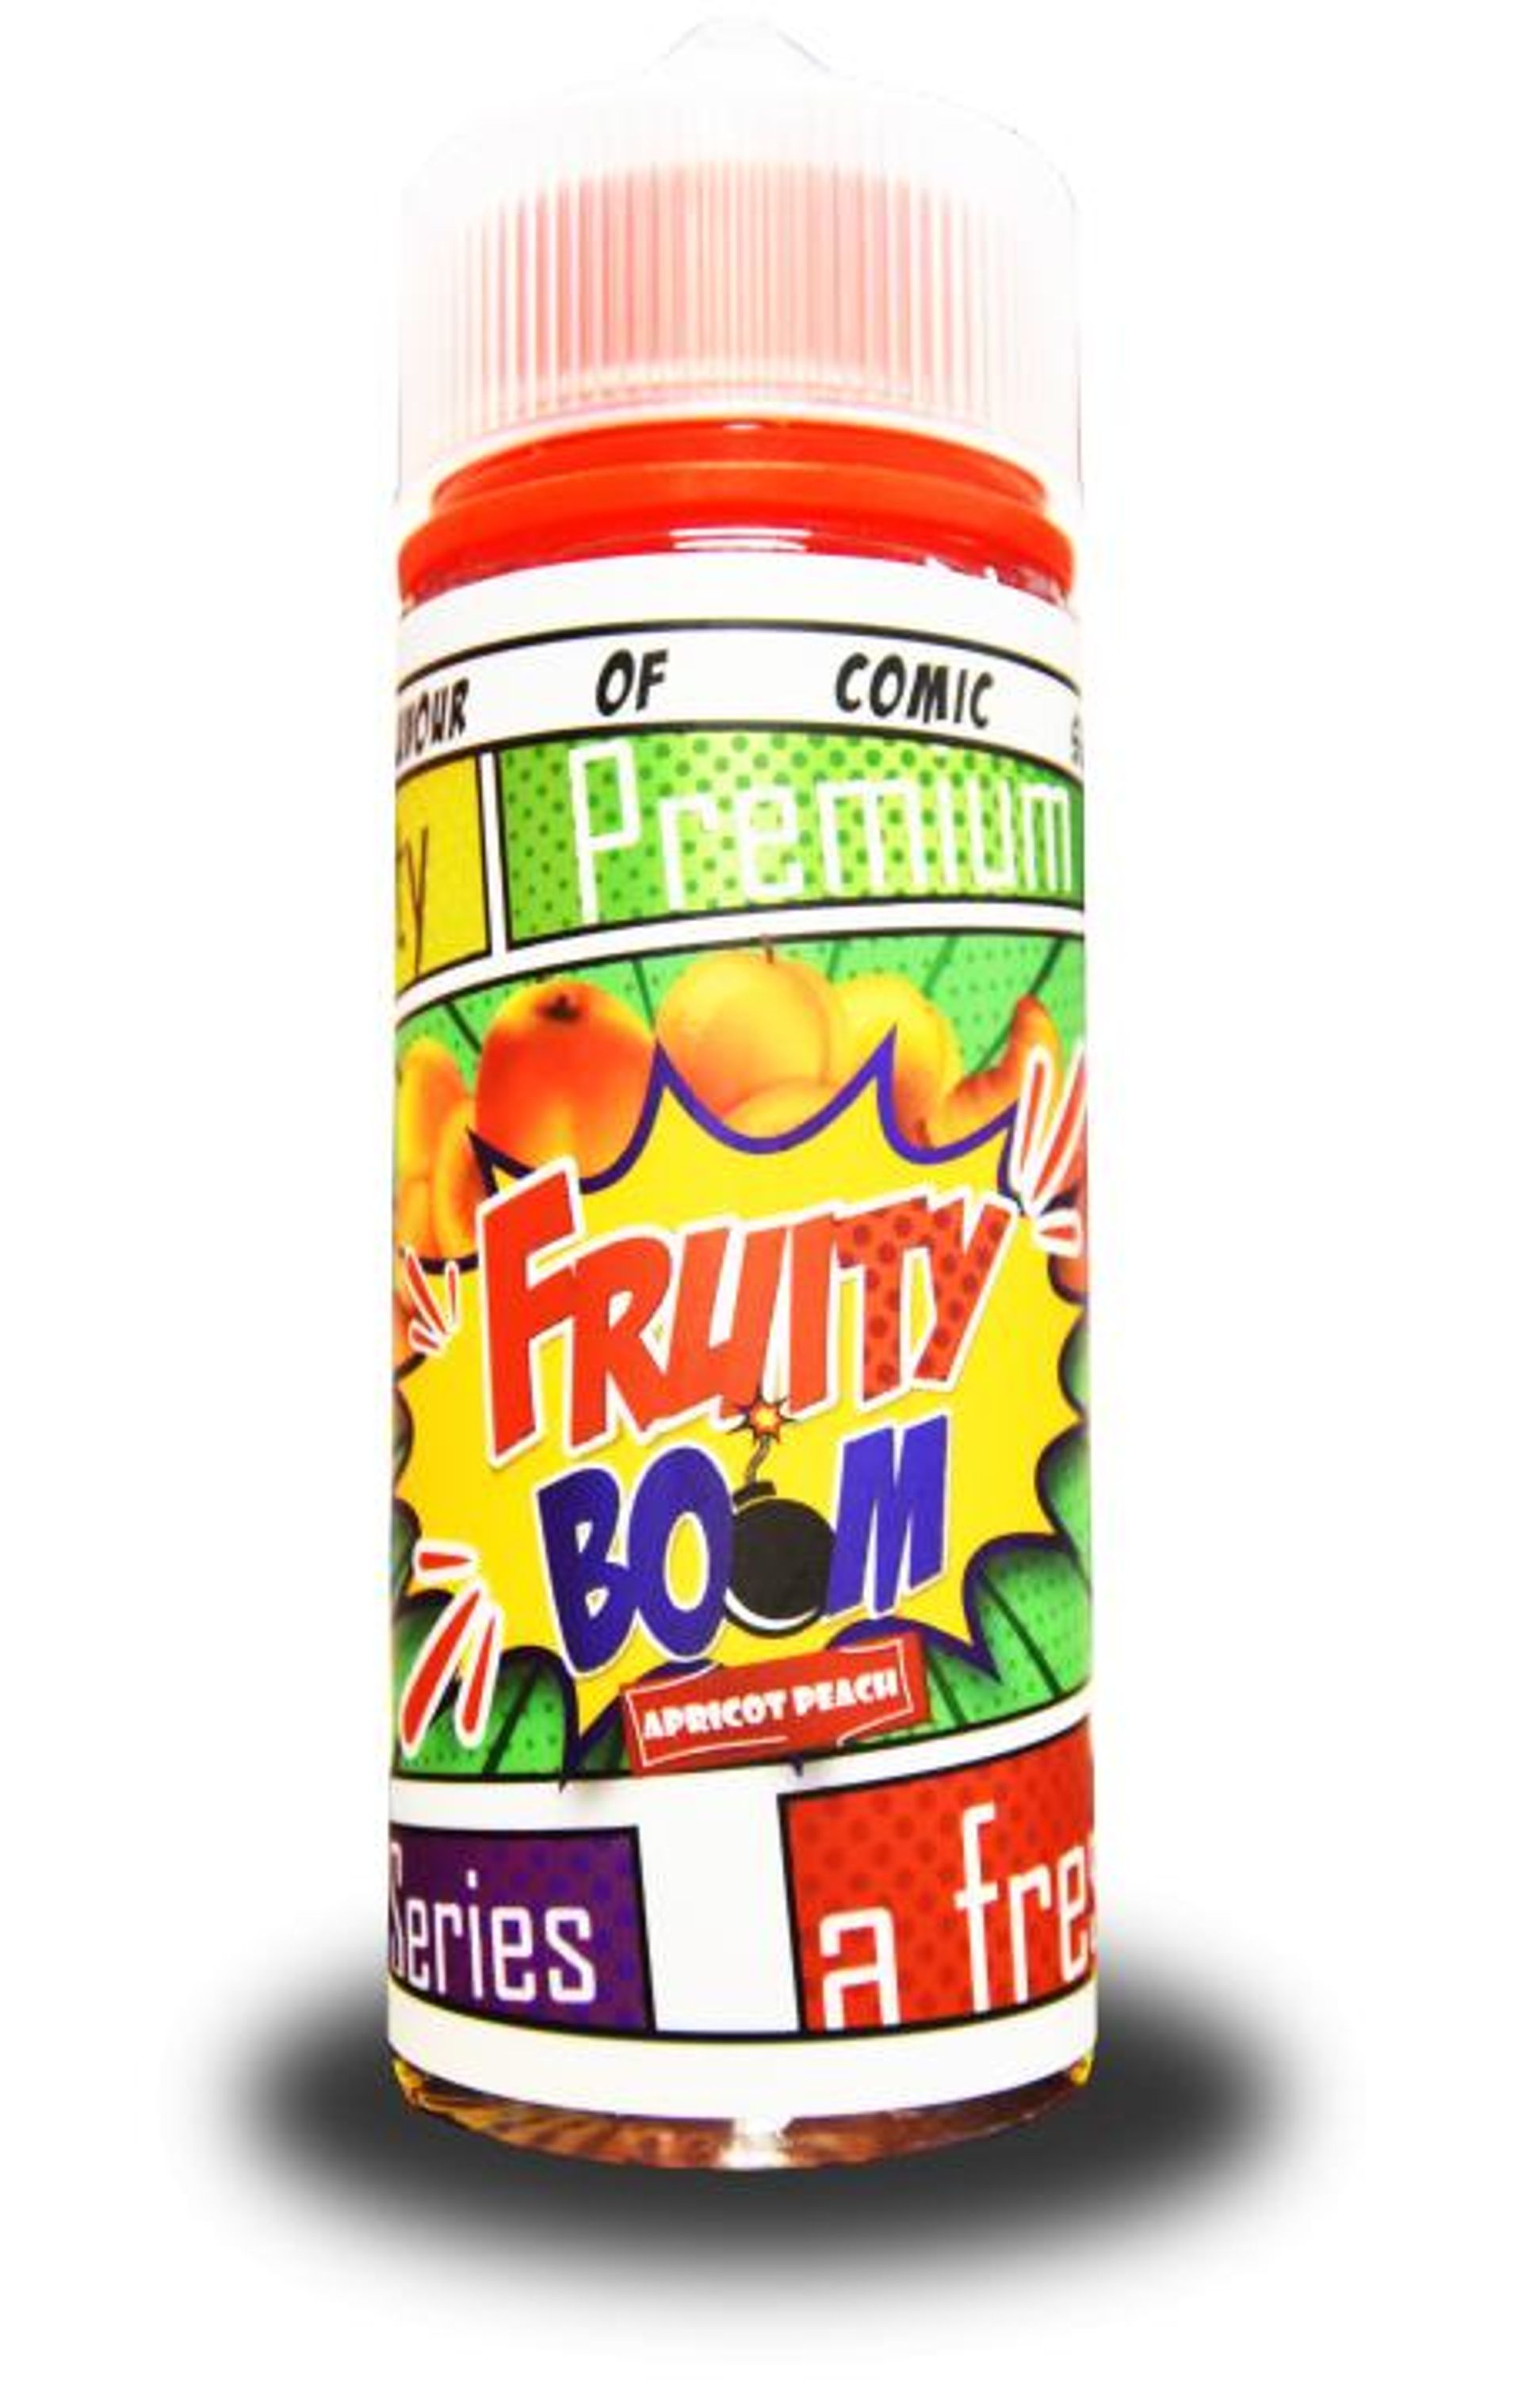 Image of Apricot Peach by Fruity Boom